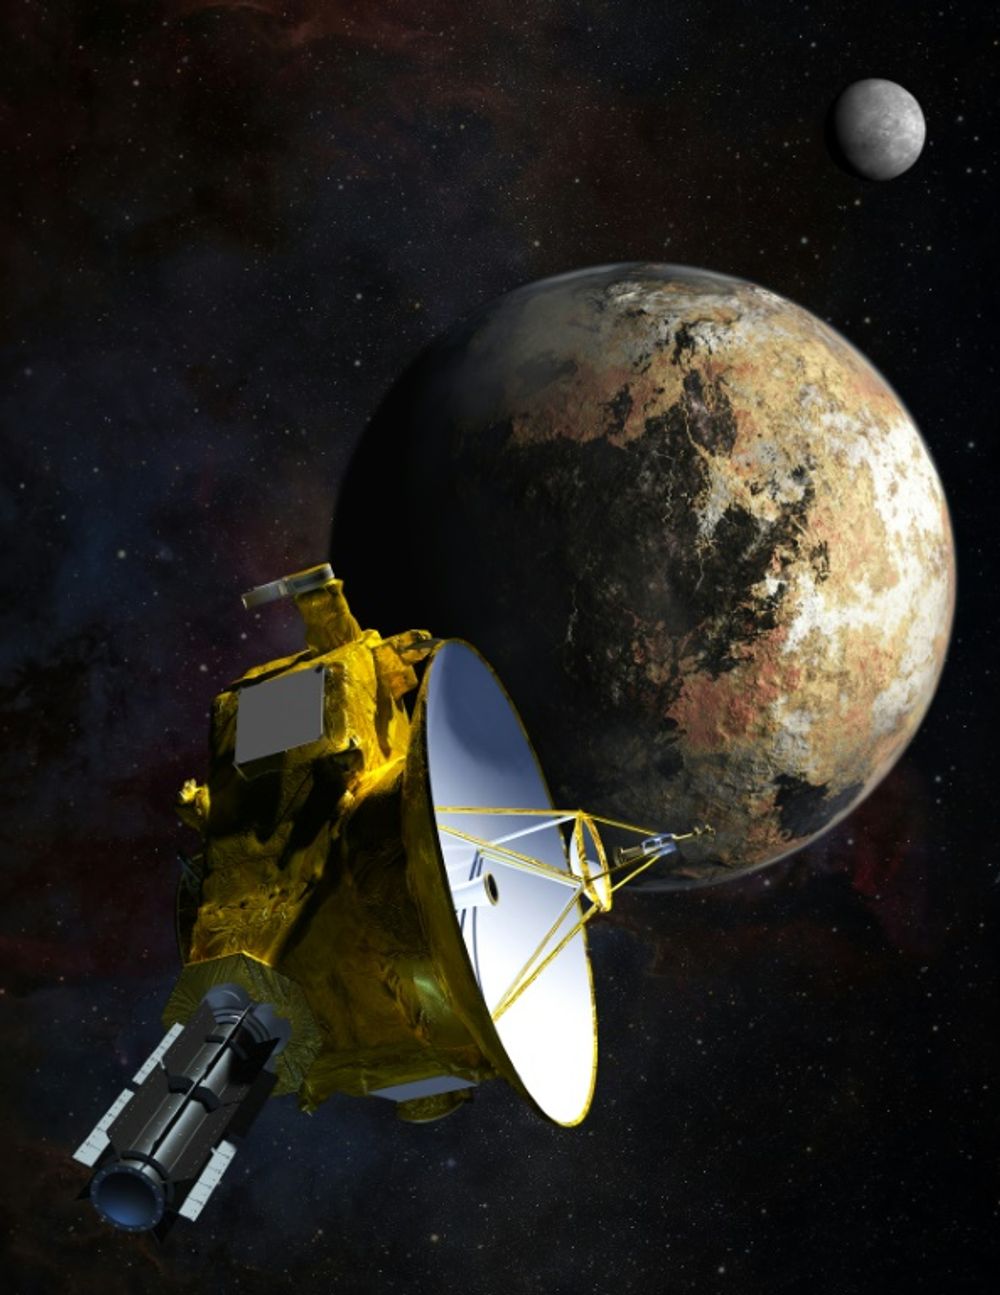 NASA Spaceship Closes In On Most Distant World Ever Studied - I24NEWS